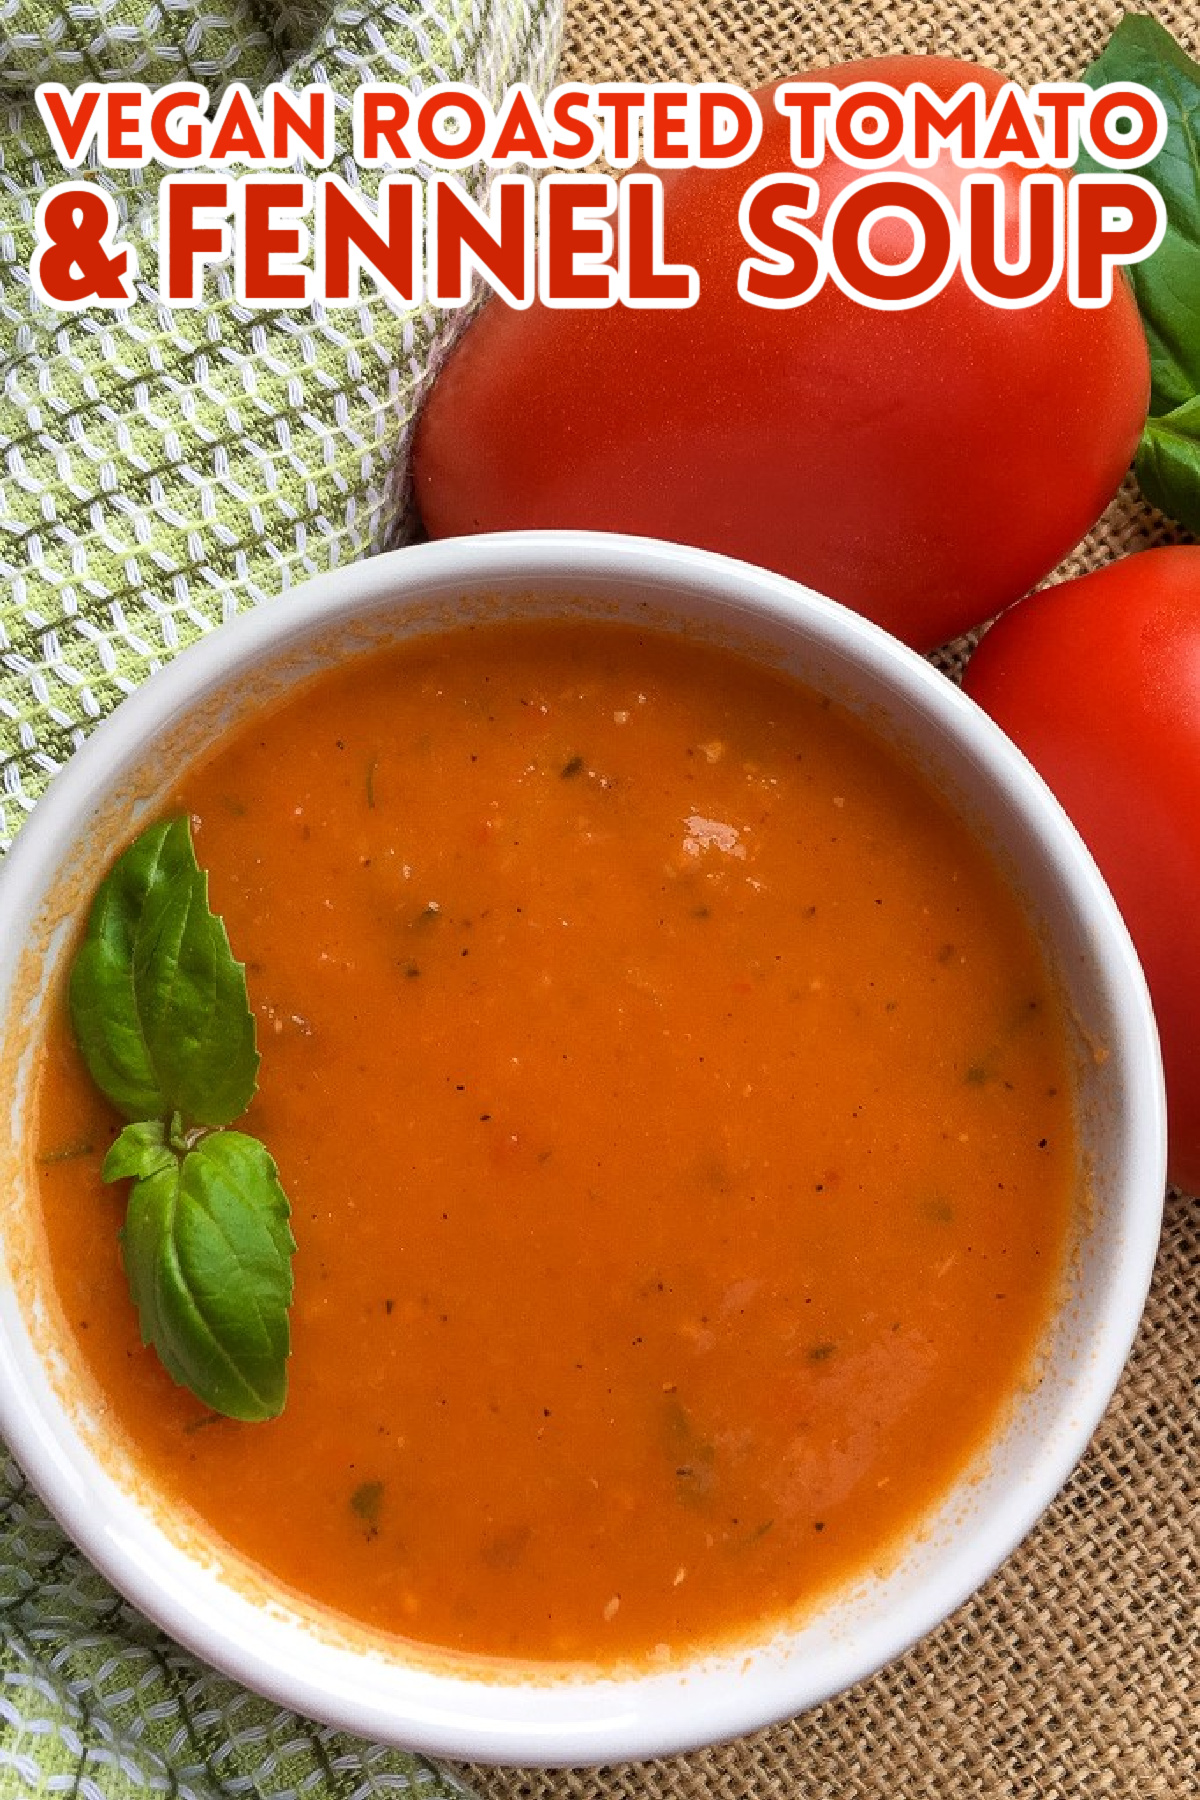 This vegan roasted tomato and fennel soup is dairy-free but creamy and comforting. This easy homemade soup is a great way to use tomatoes!